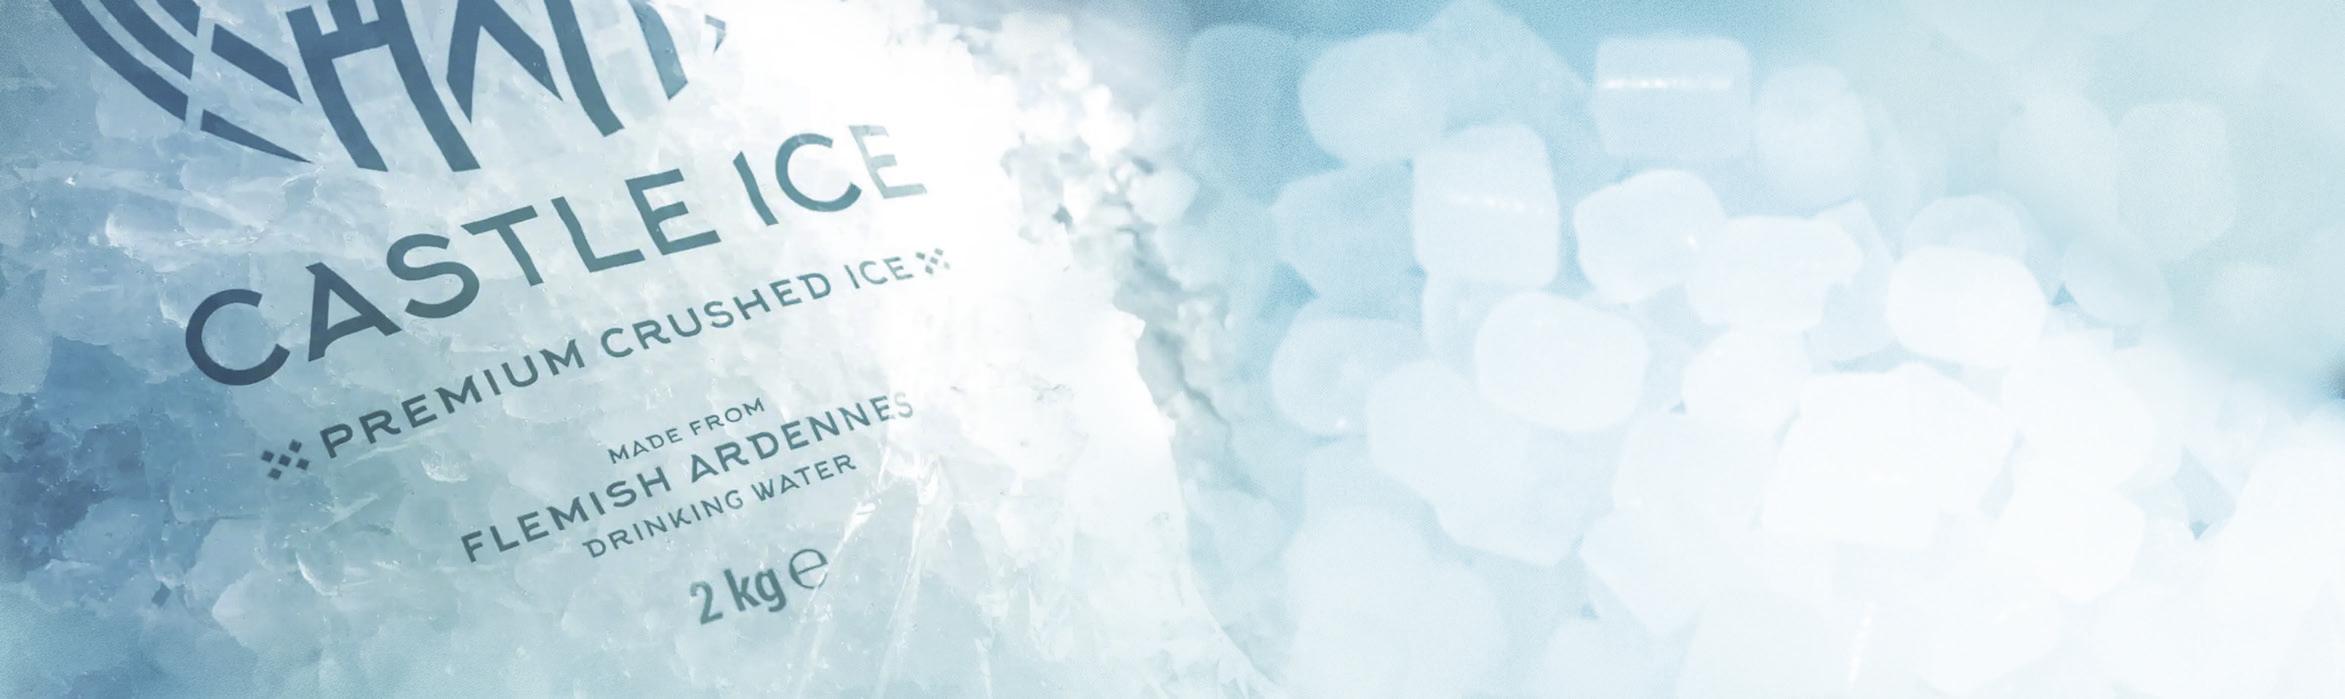 Banner home - Castle Ice - premium crushed ice